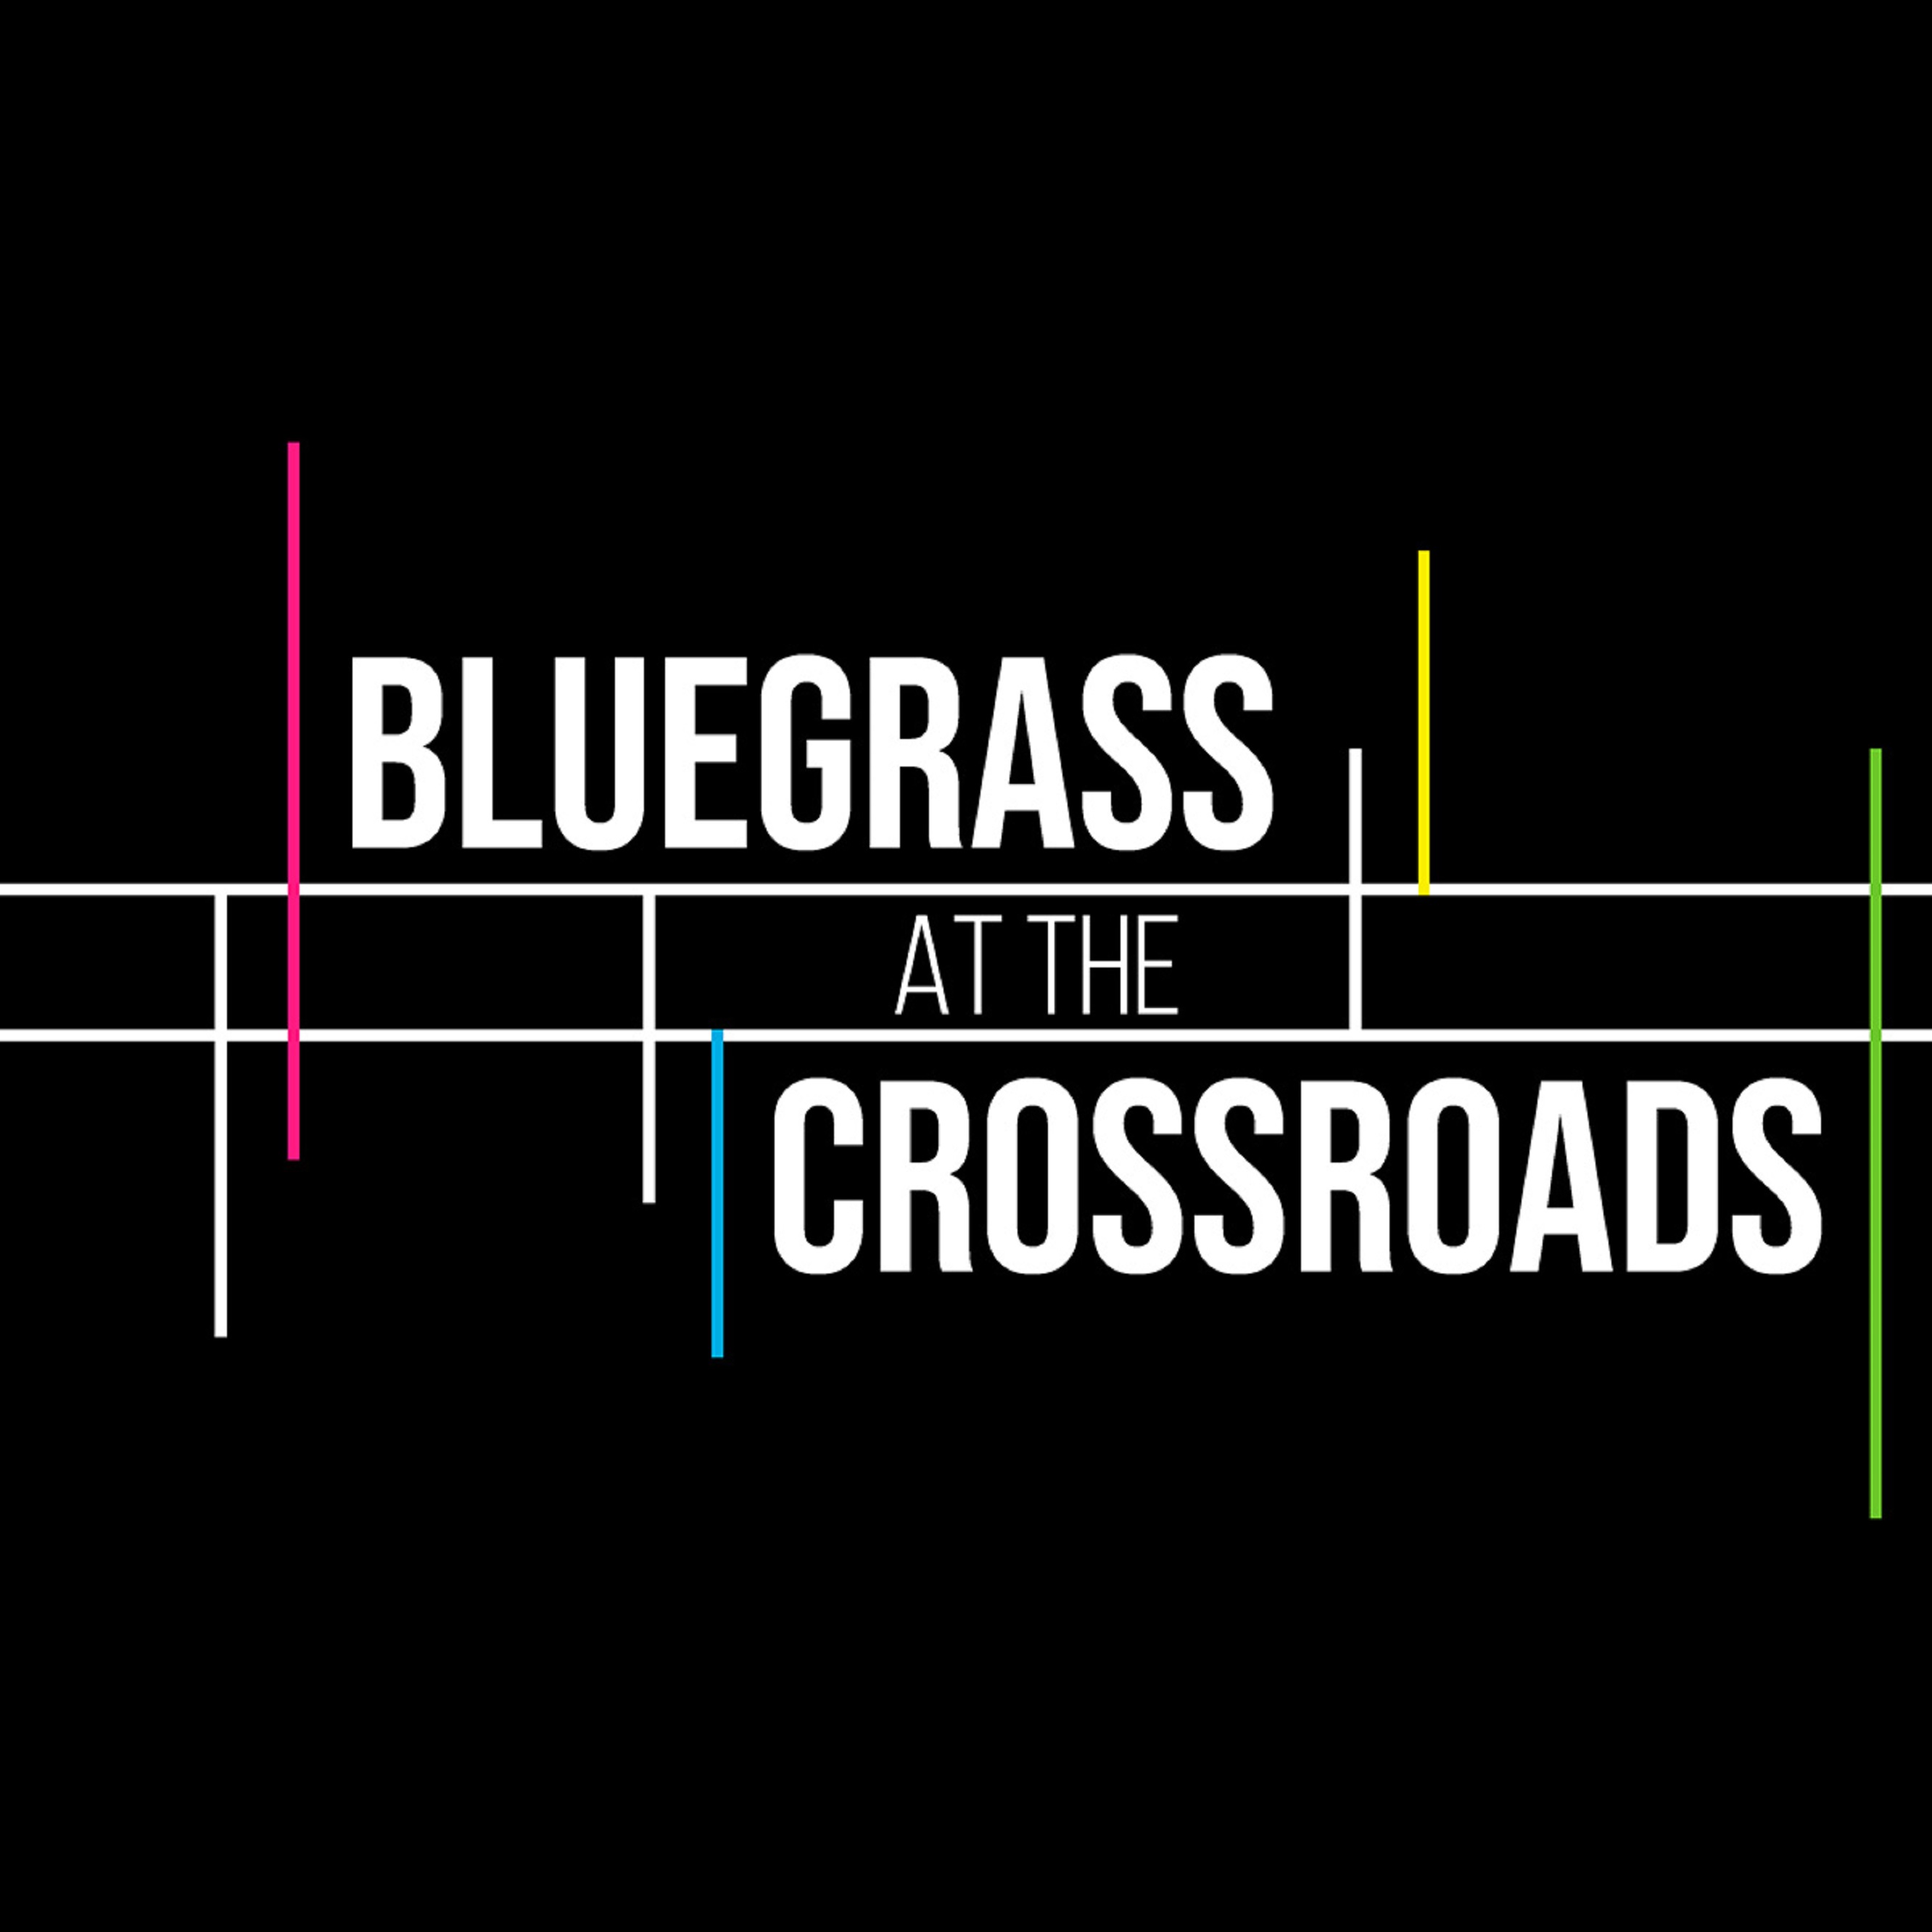 Bluegrass at the Crossroads album brings together distinct artists, new music